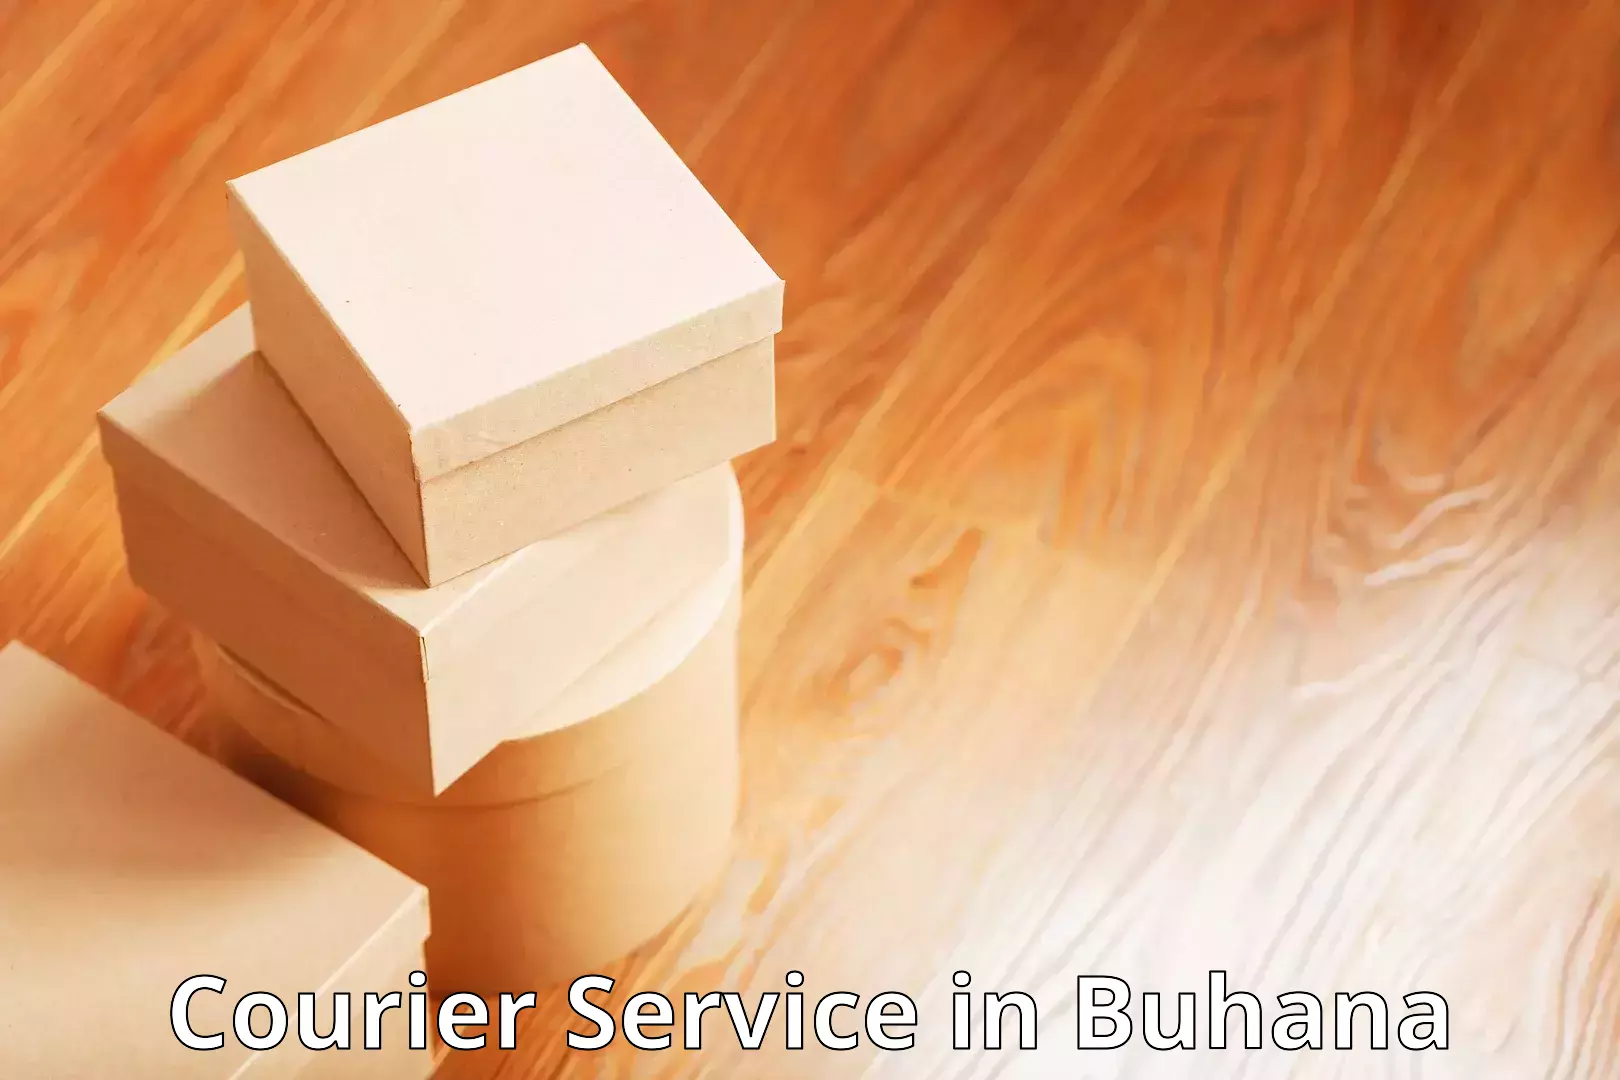 Modern delivery methods in Buhana